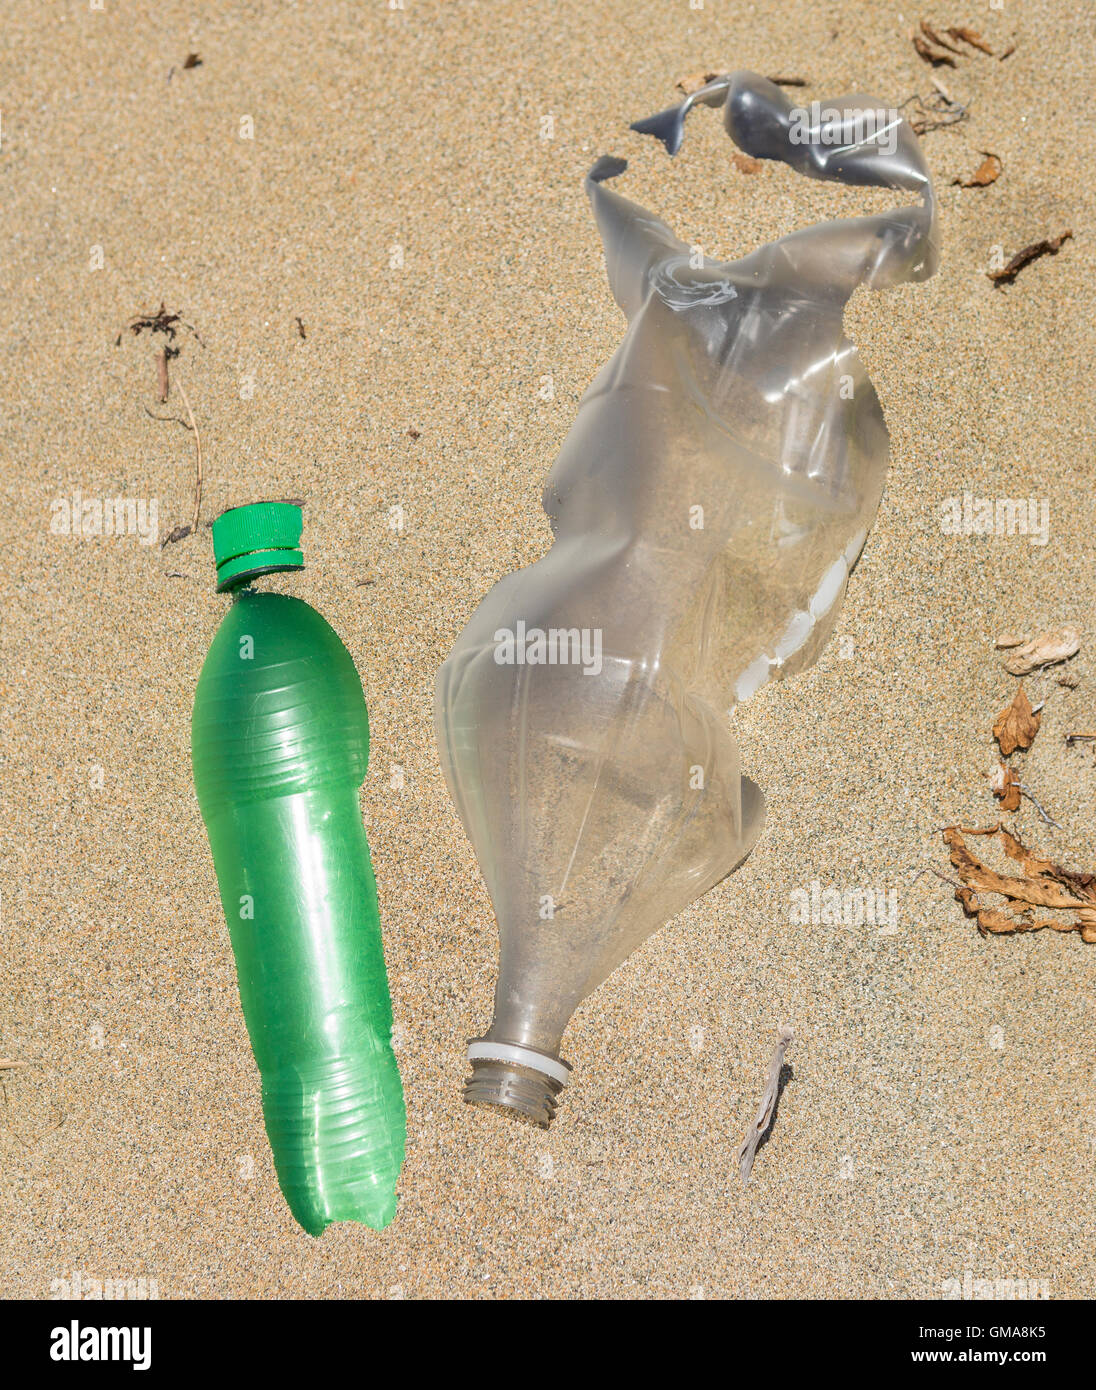 DOMINICAN REPUBLIC - Garbage on beach, plastic bottles and trash, near mouth of Yasica RIver. Stock Photo